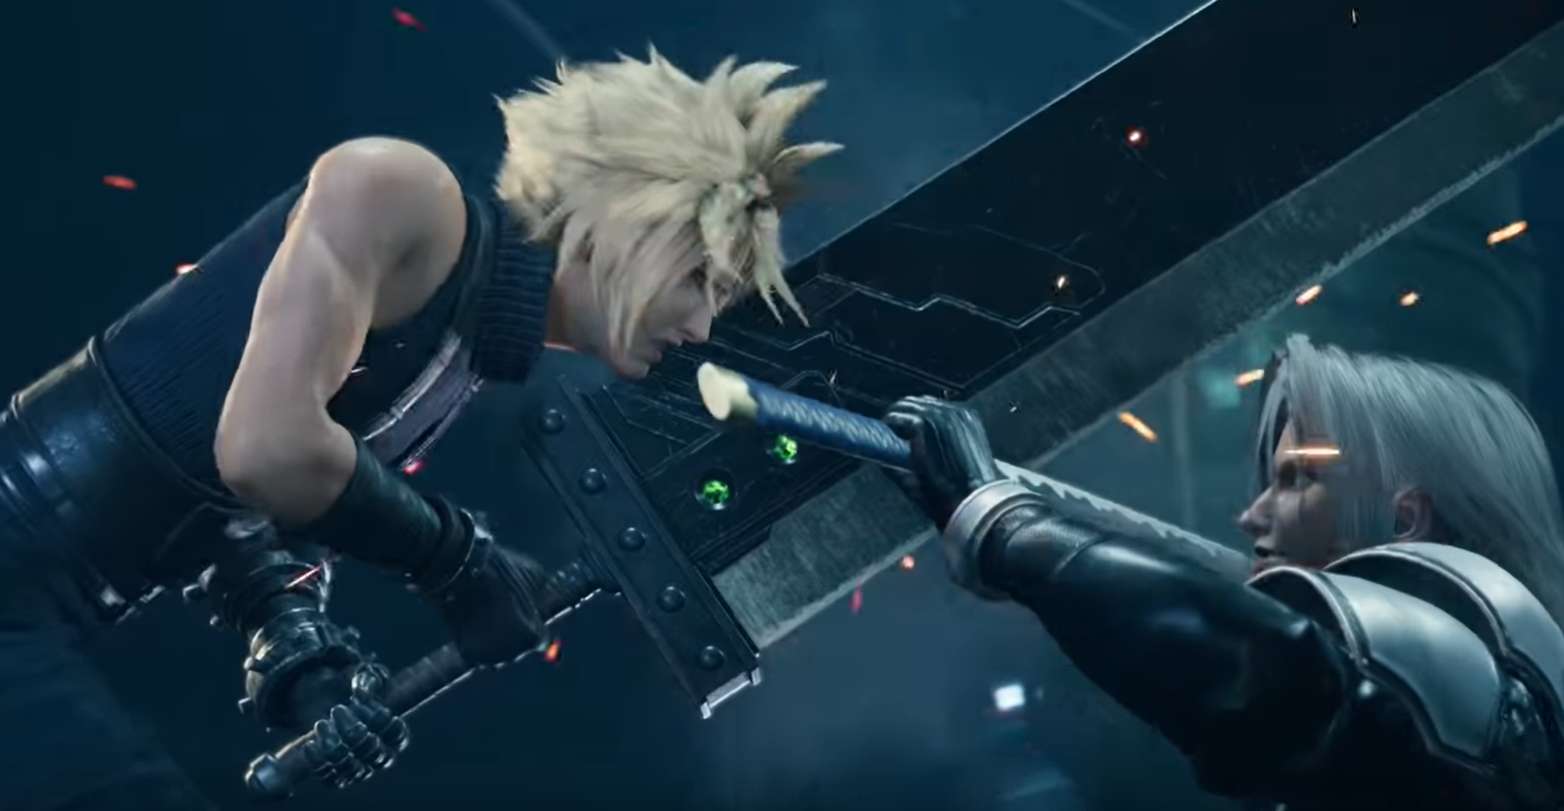 Square Enix Will Make Game Announcements Originally Slated For E3 2020 During July And August